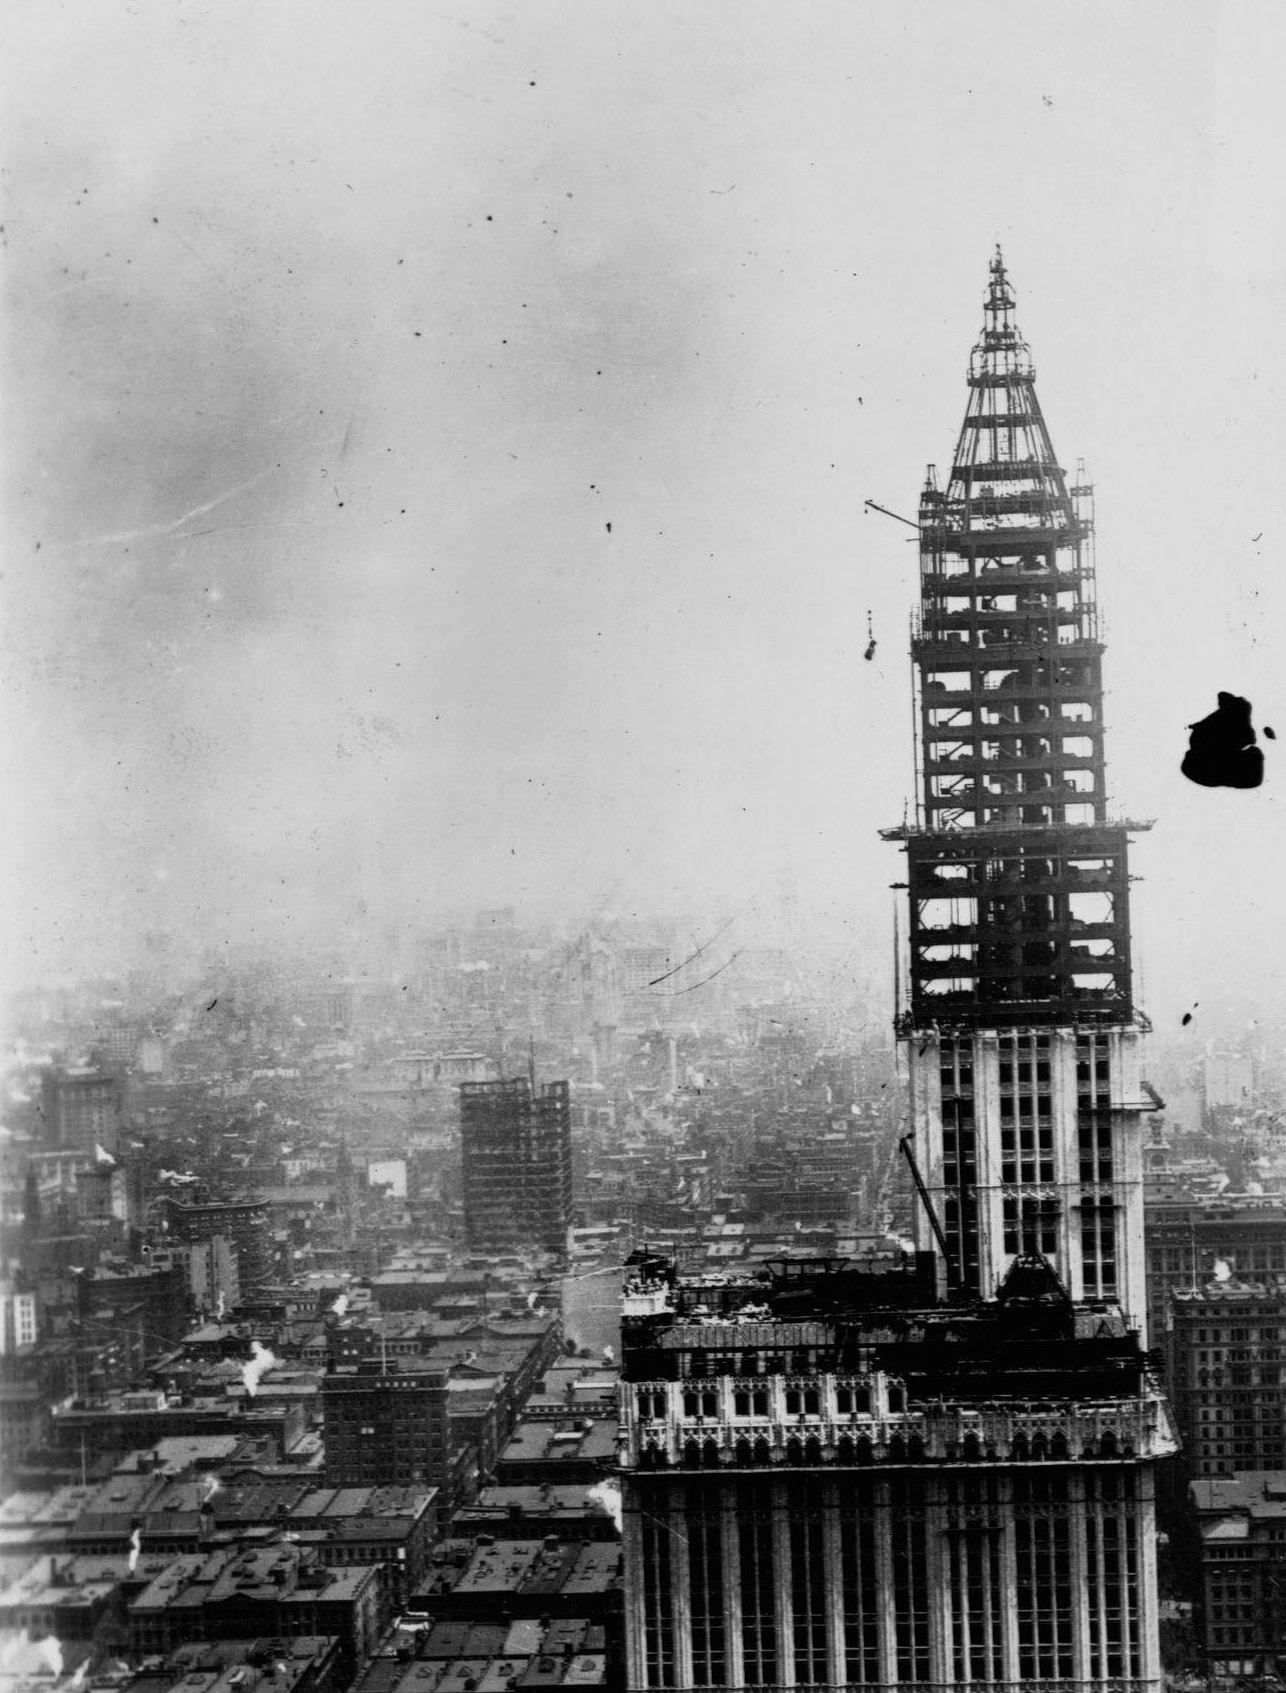 A View Of The Woolworth Building Under Construction. Upon Completion In 1913, The Woolworth Building Became The Tallest Building In The World. July 1, 1913, New York City